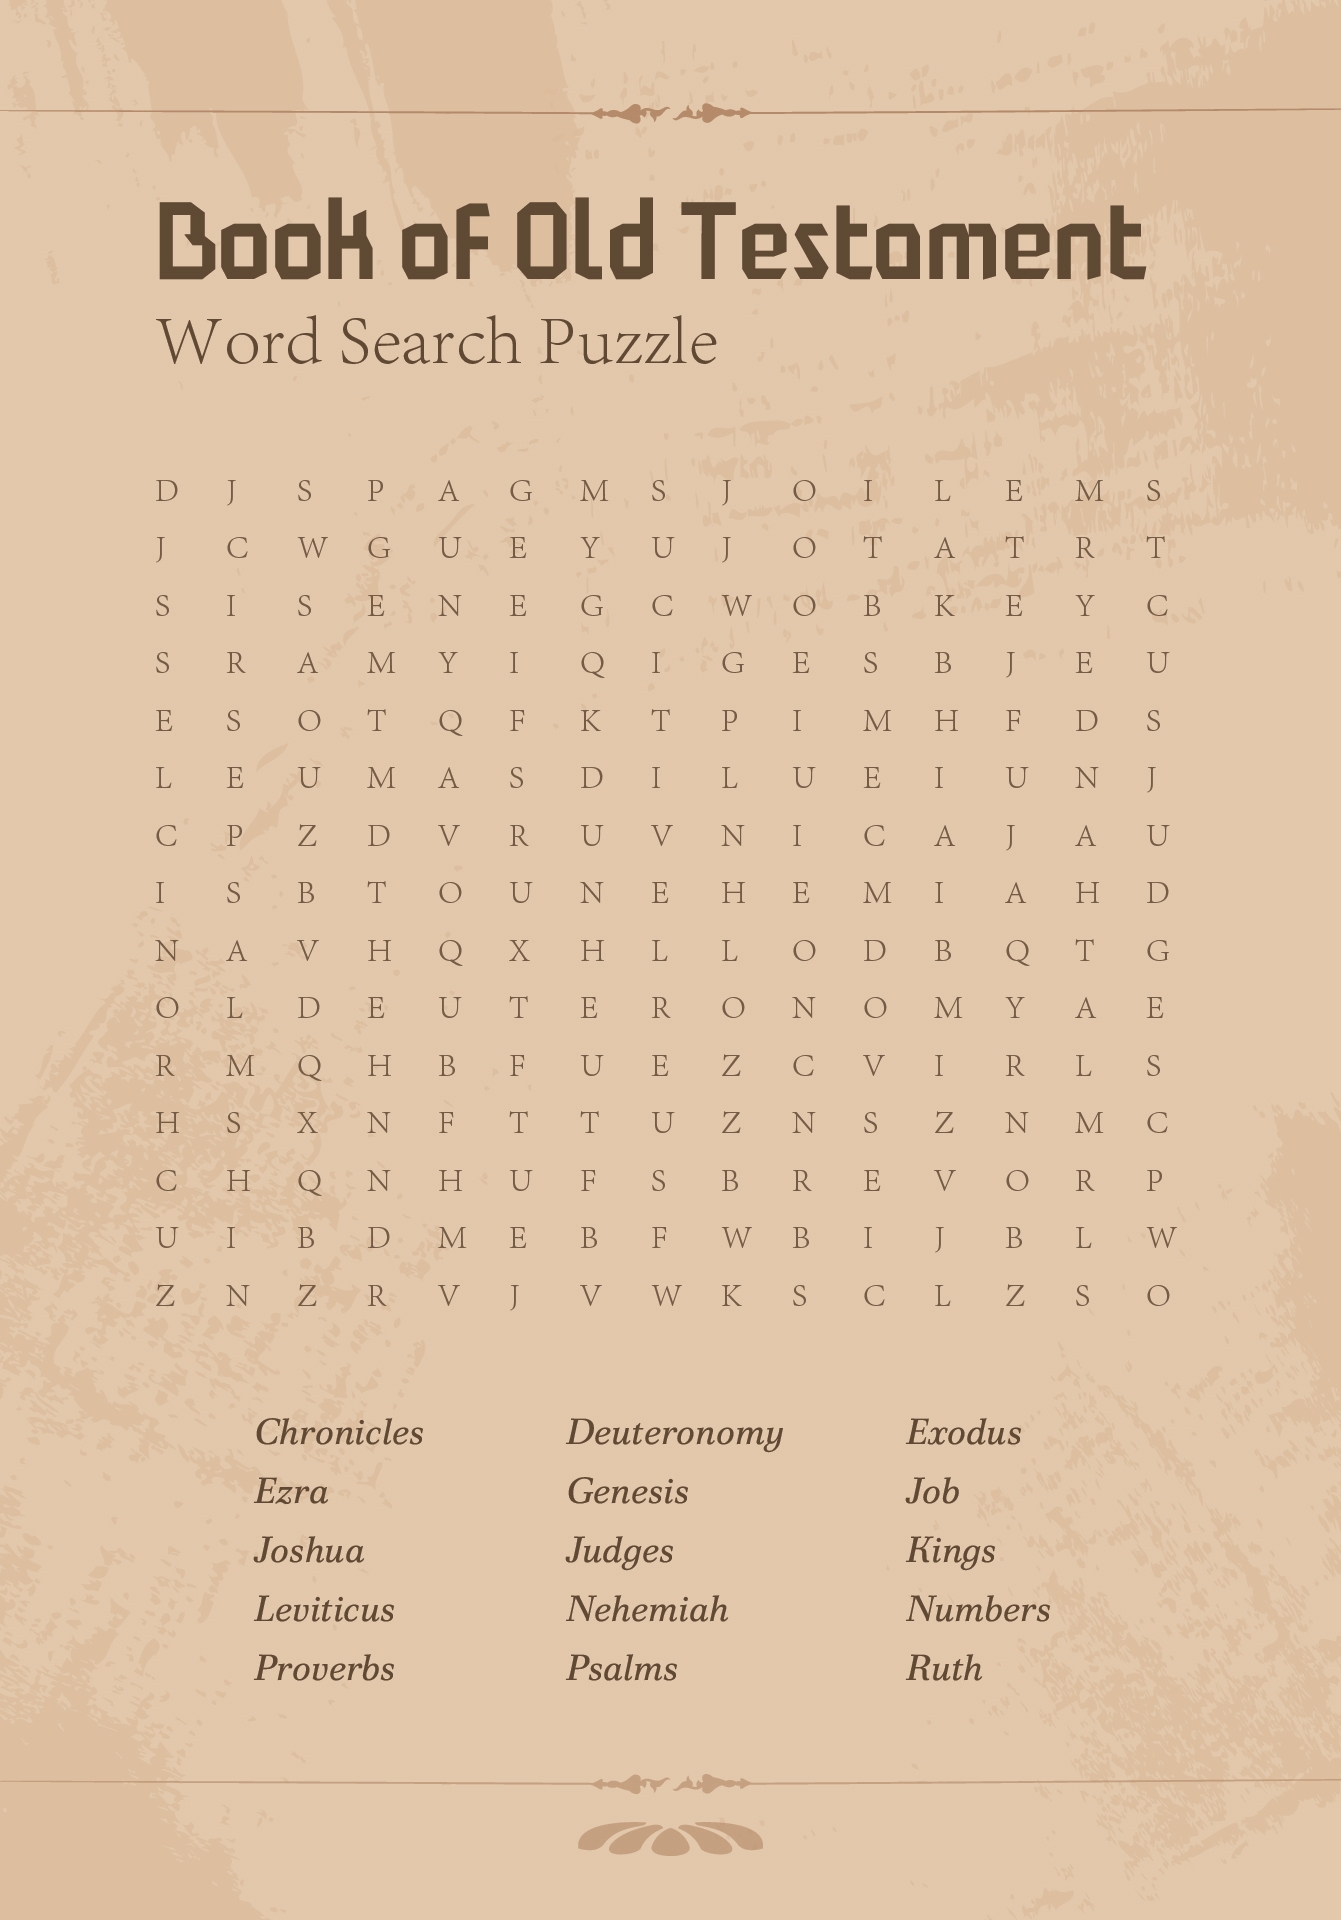 LDS Word Search Puzzles